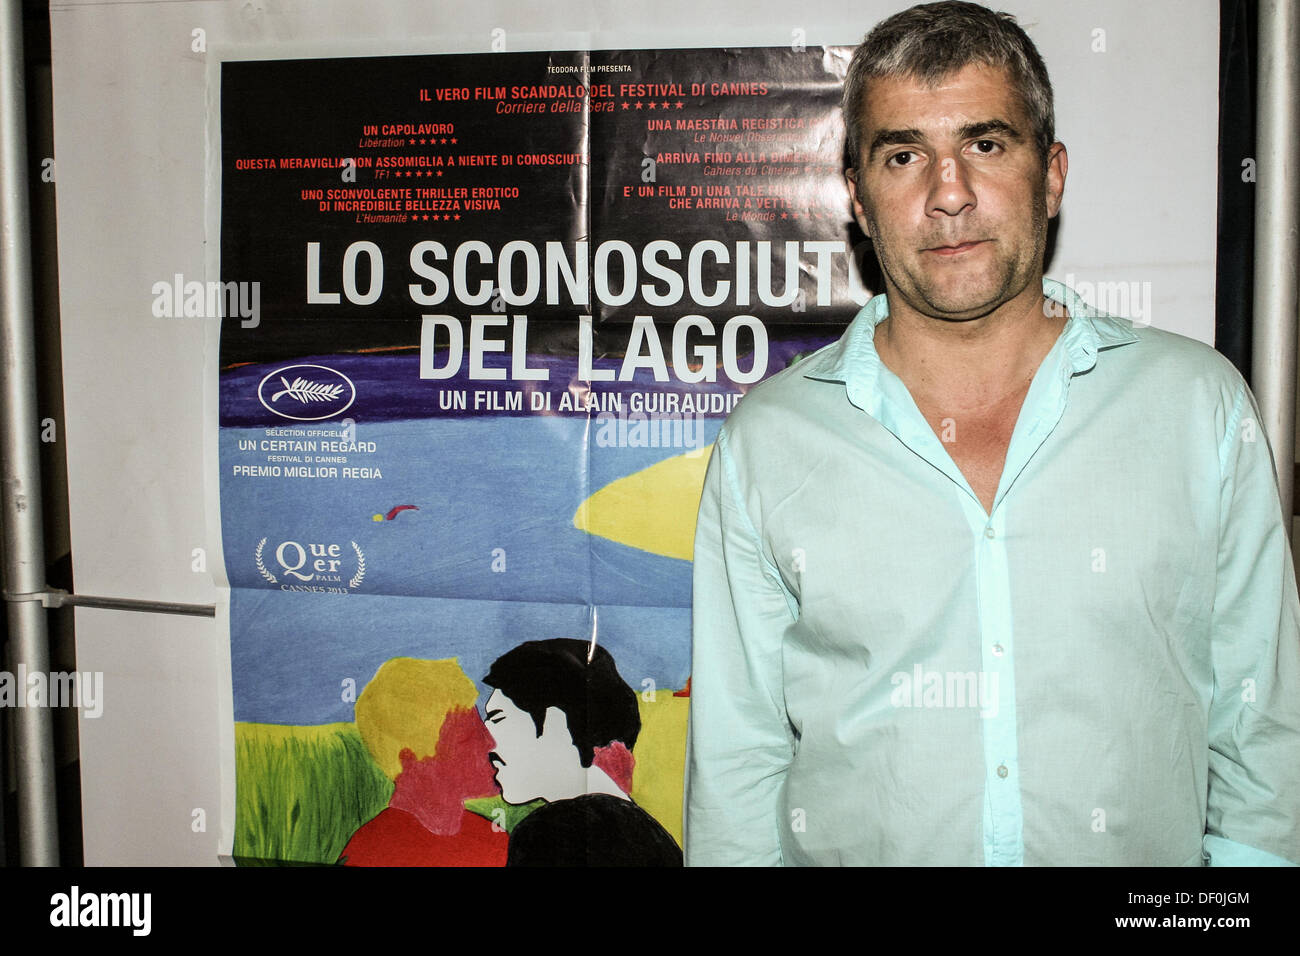 Bologna, Italy. 25th September, 2013. Premiere of the movie 'L'inconnu du lac' directed by Alain Guiraudie, Scandal Movie at Canne 2013, talk with the director in Bologna, Italy on Sep 25, 2013. Stock Photo